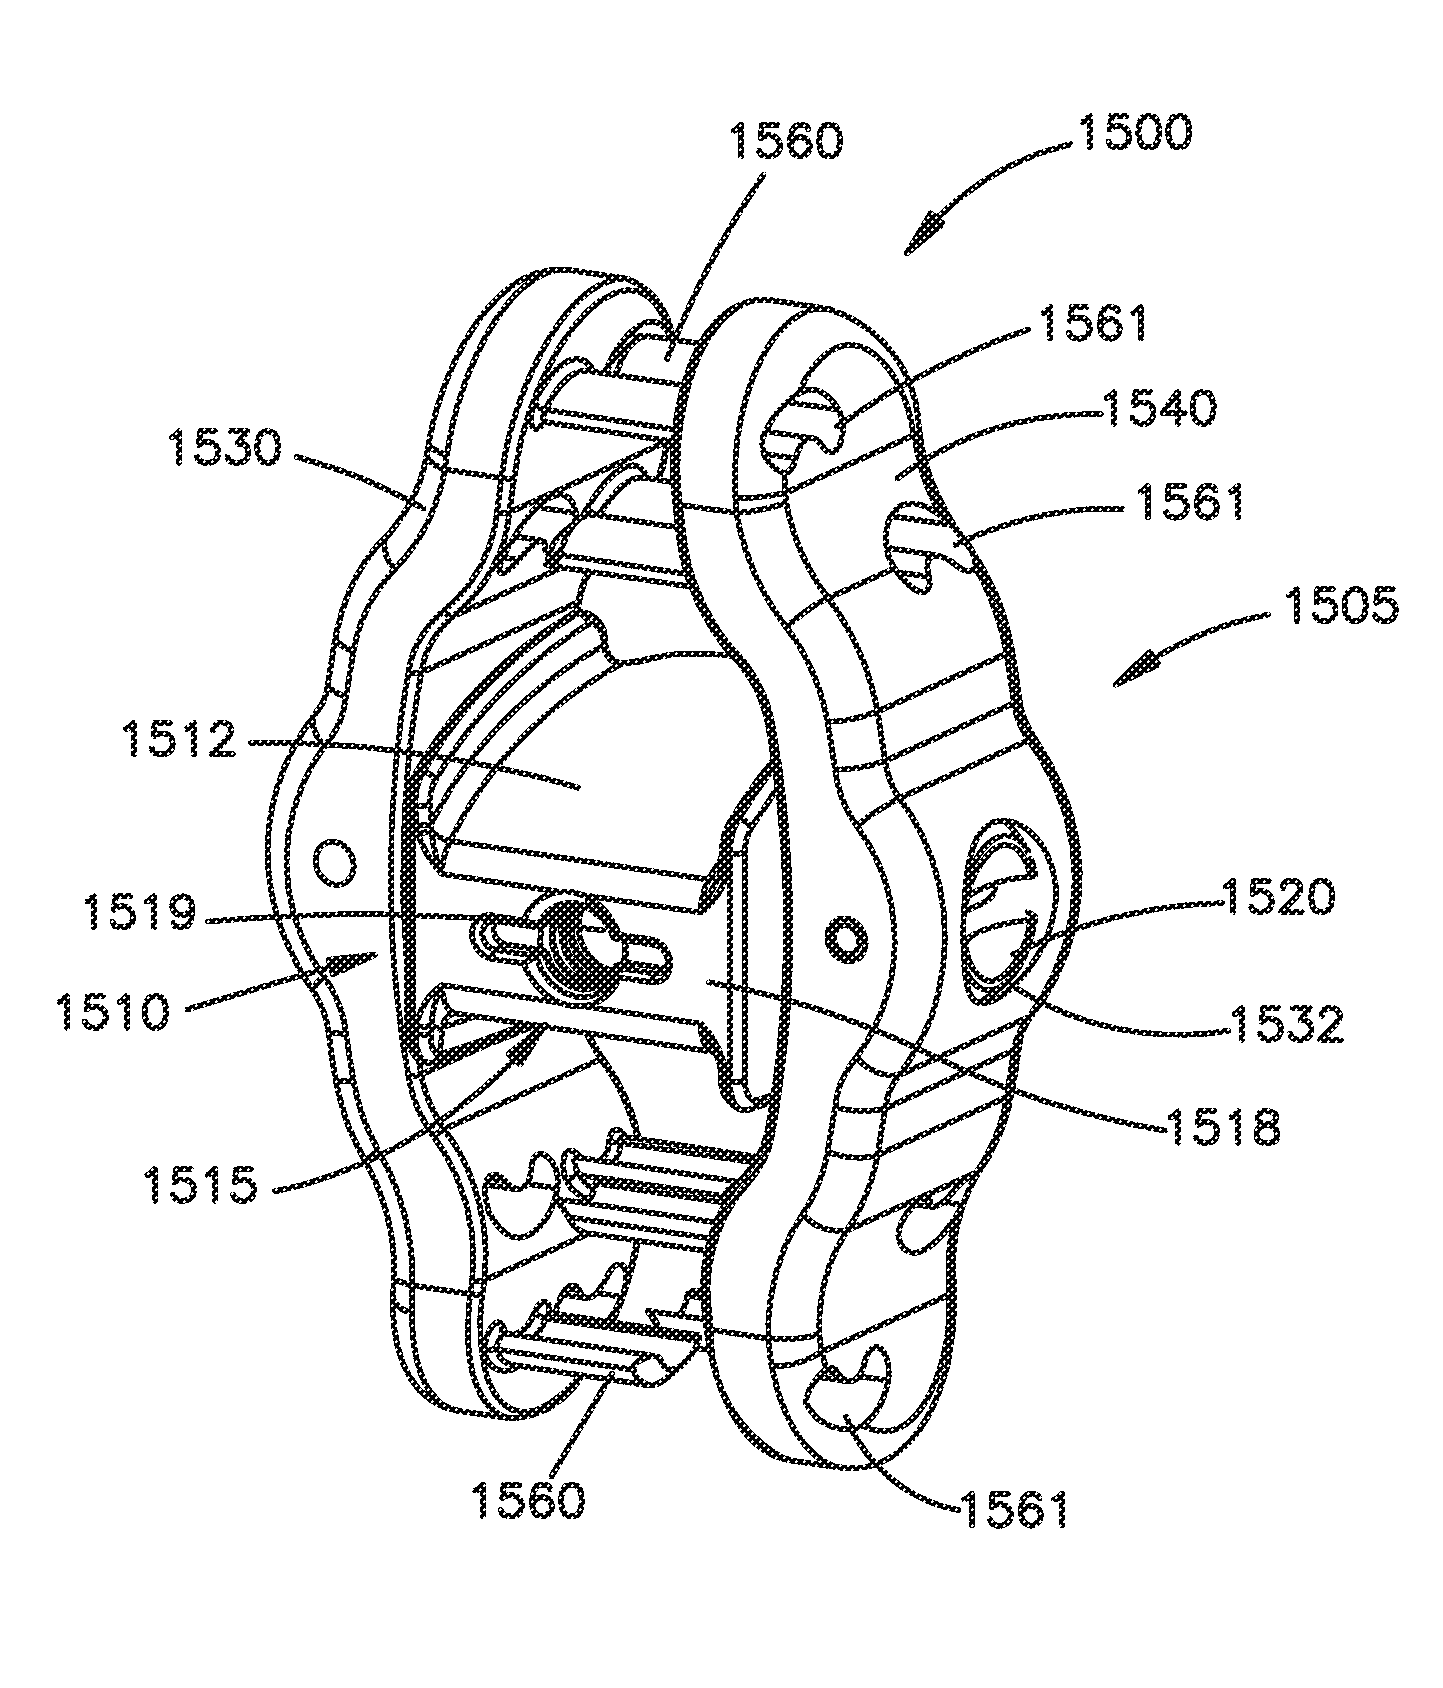 Interspinous spacer assembly